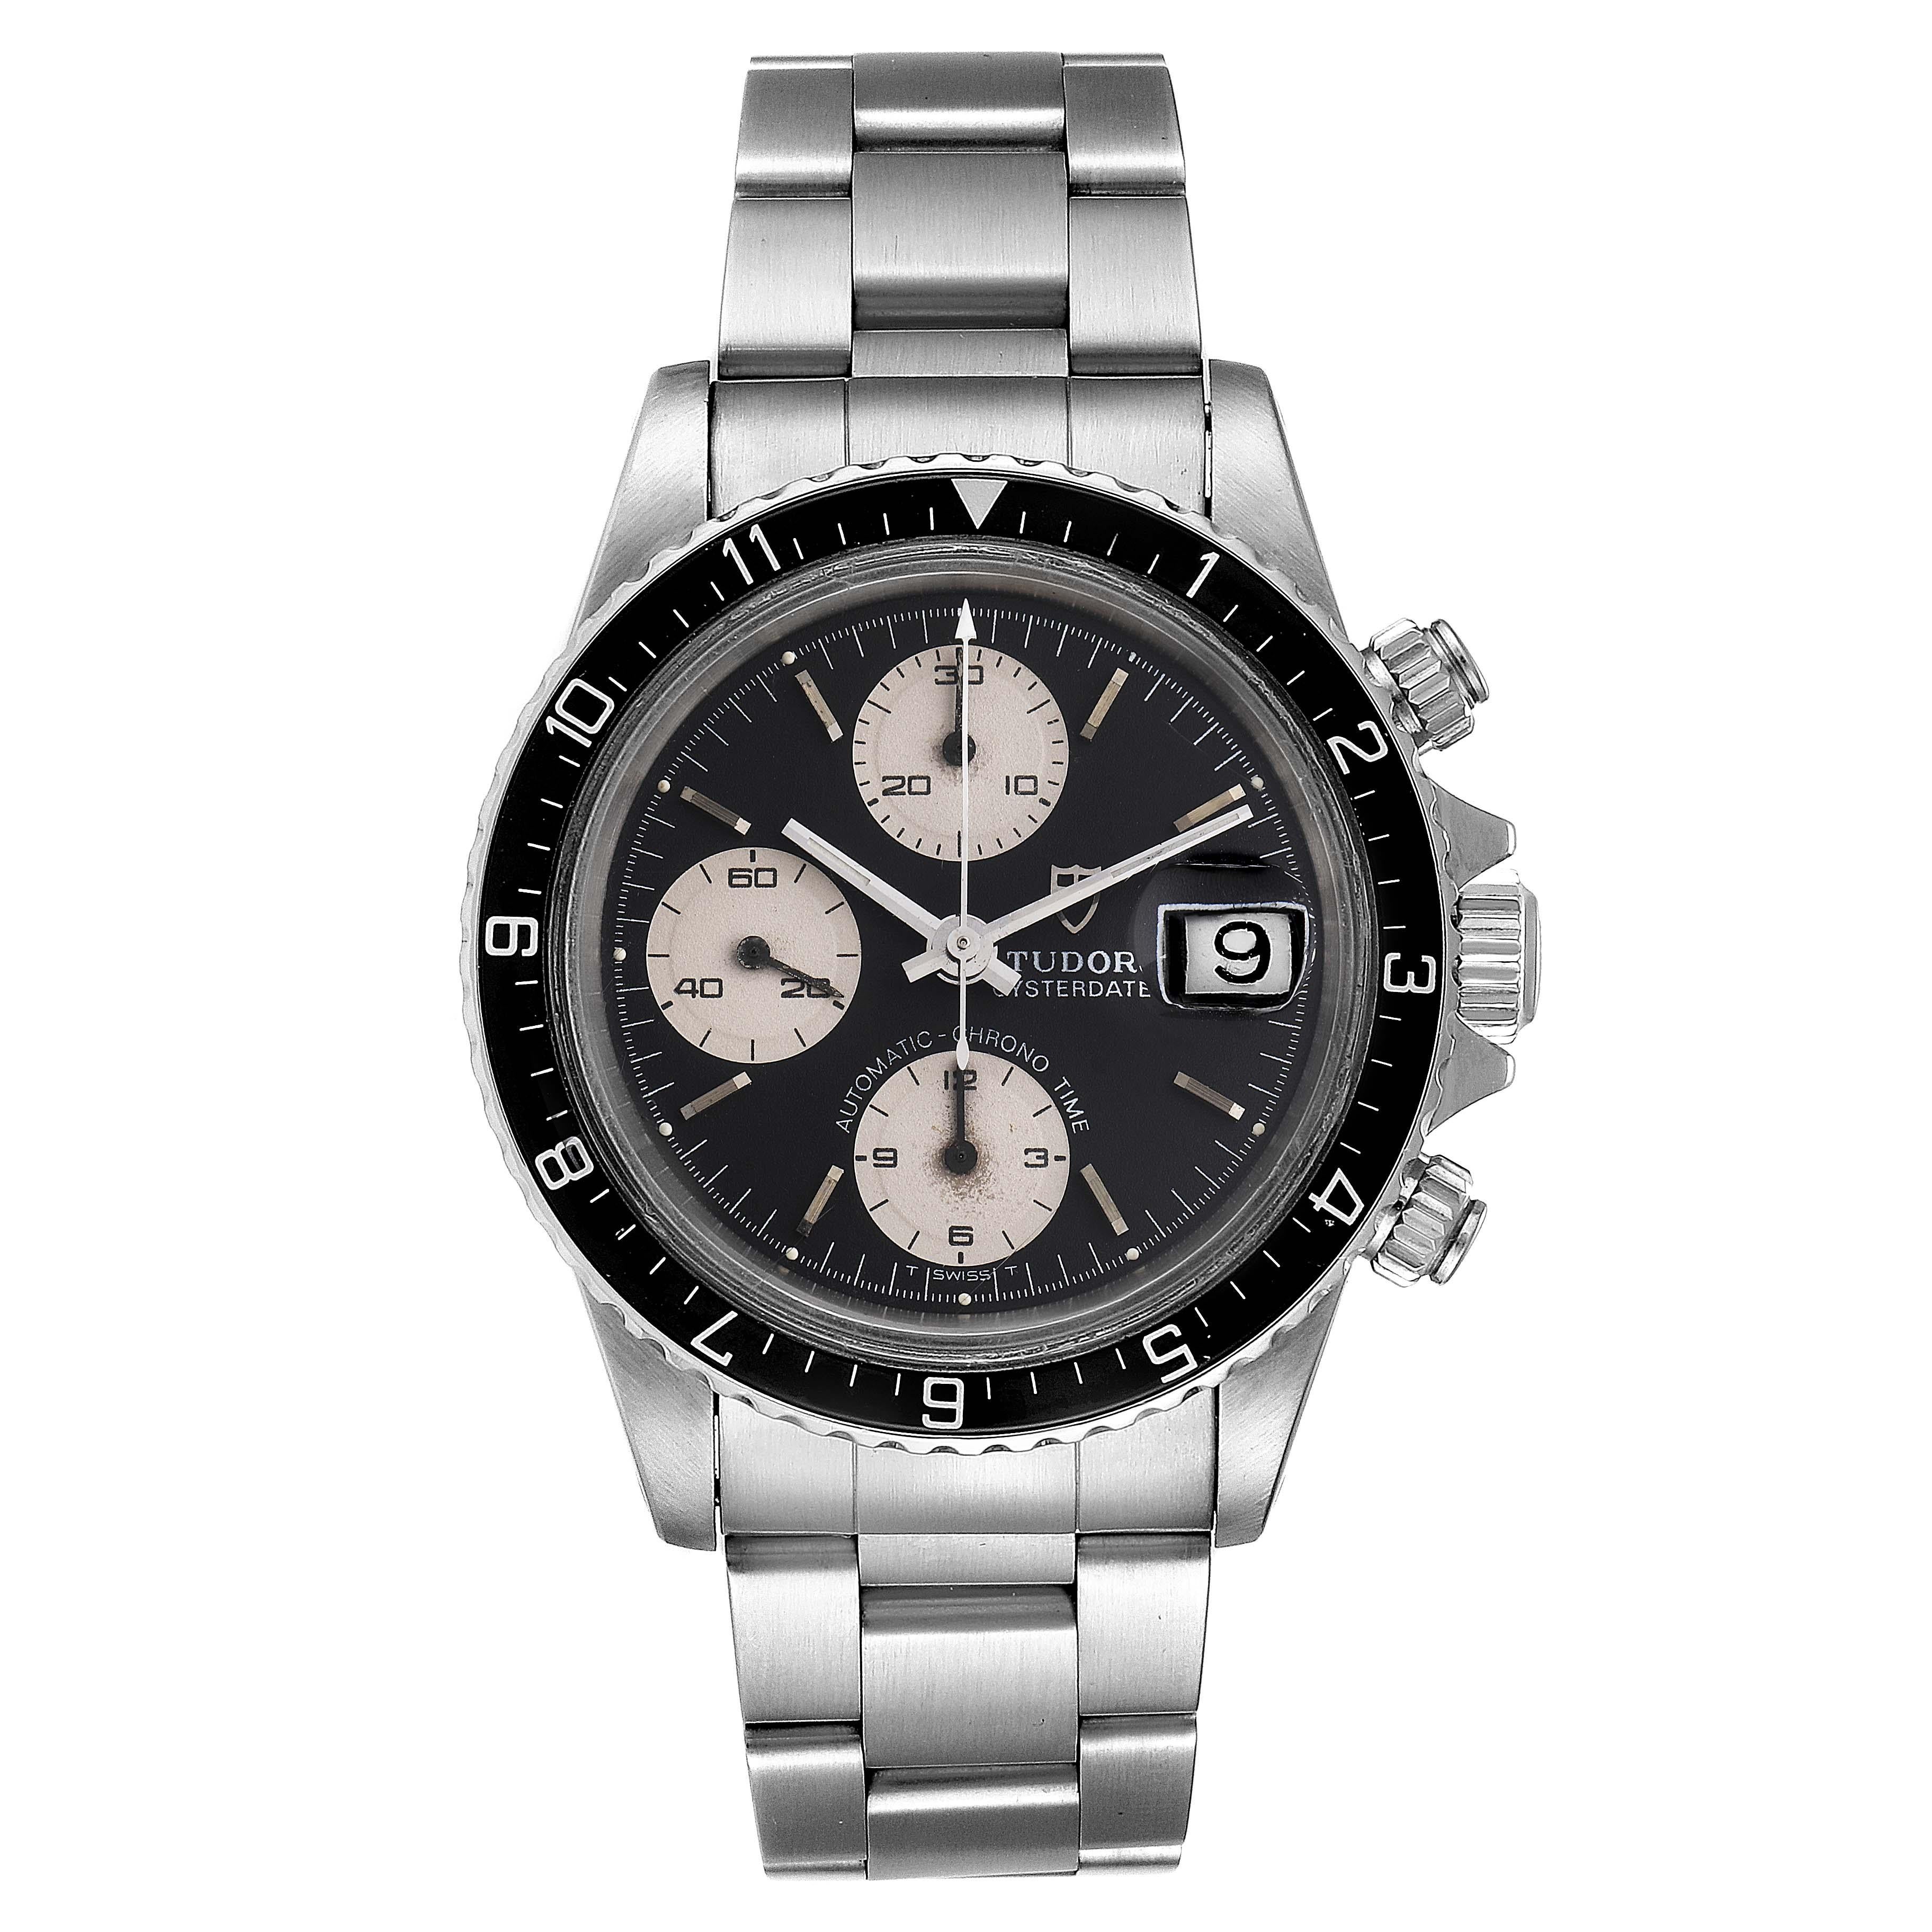 Tudor Oysterdate Big Block Vintage Chronograph Steel Mens Watch 79170. Automatic self-winding movement with chronograph function. Rhodium-plated, straight-line lever escapement, monometallic balance, shock absorber, self-compensating flat balance